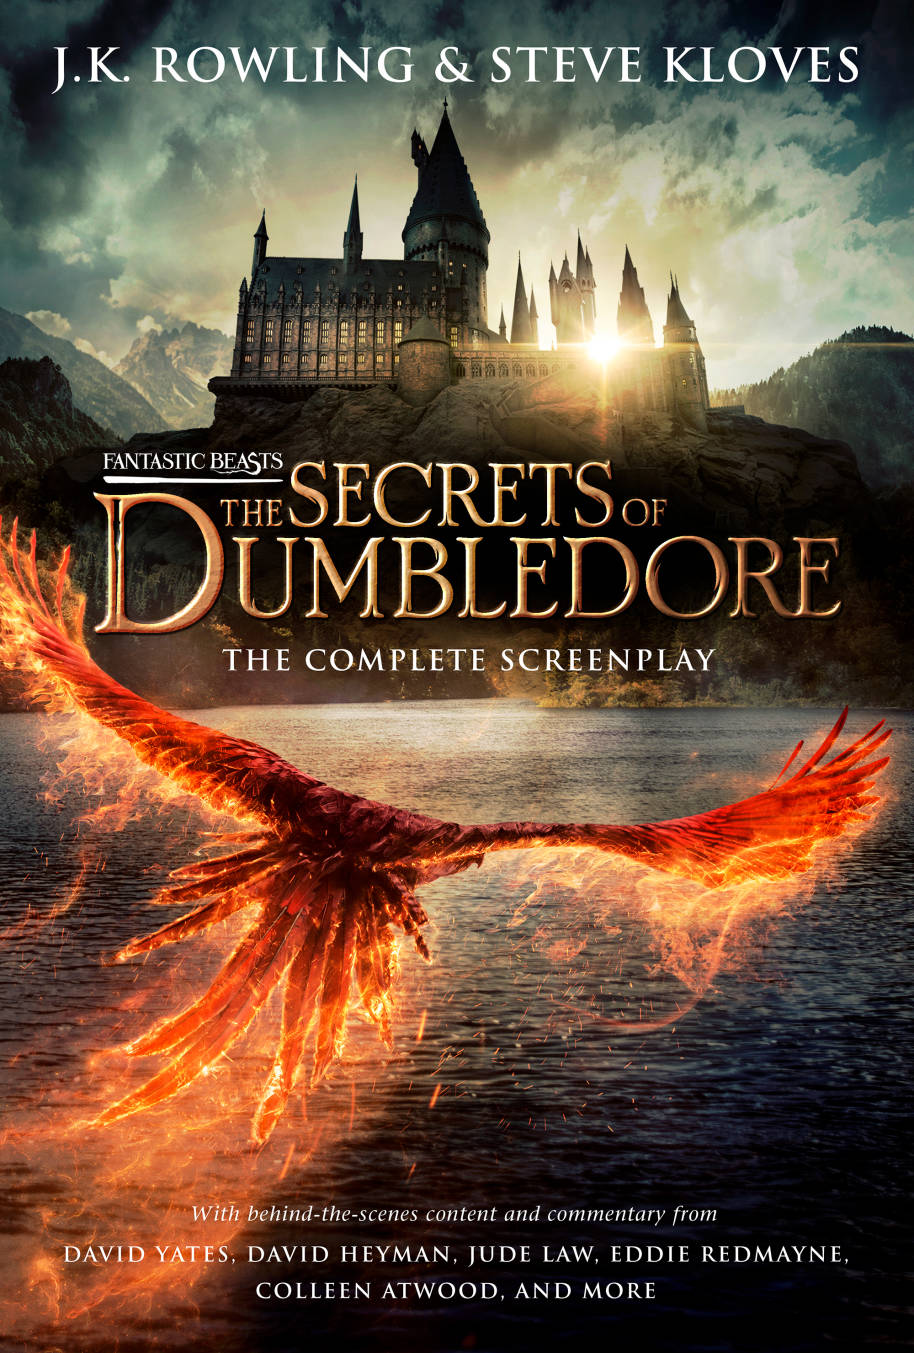 The cover of the screenplay for Fantastic Beasts the Secrets of Dumbledore. The image shows a phoenix flying over the lake towards Hogwarts.